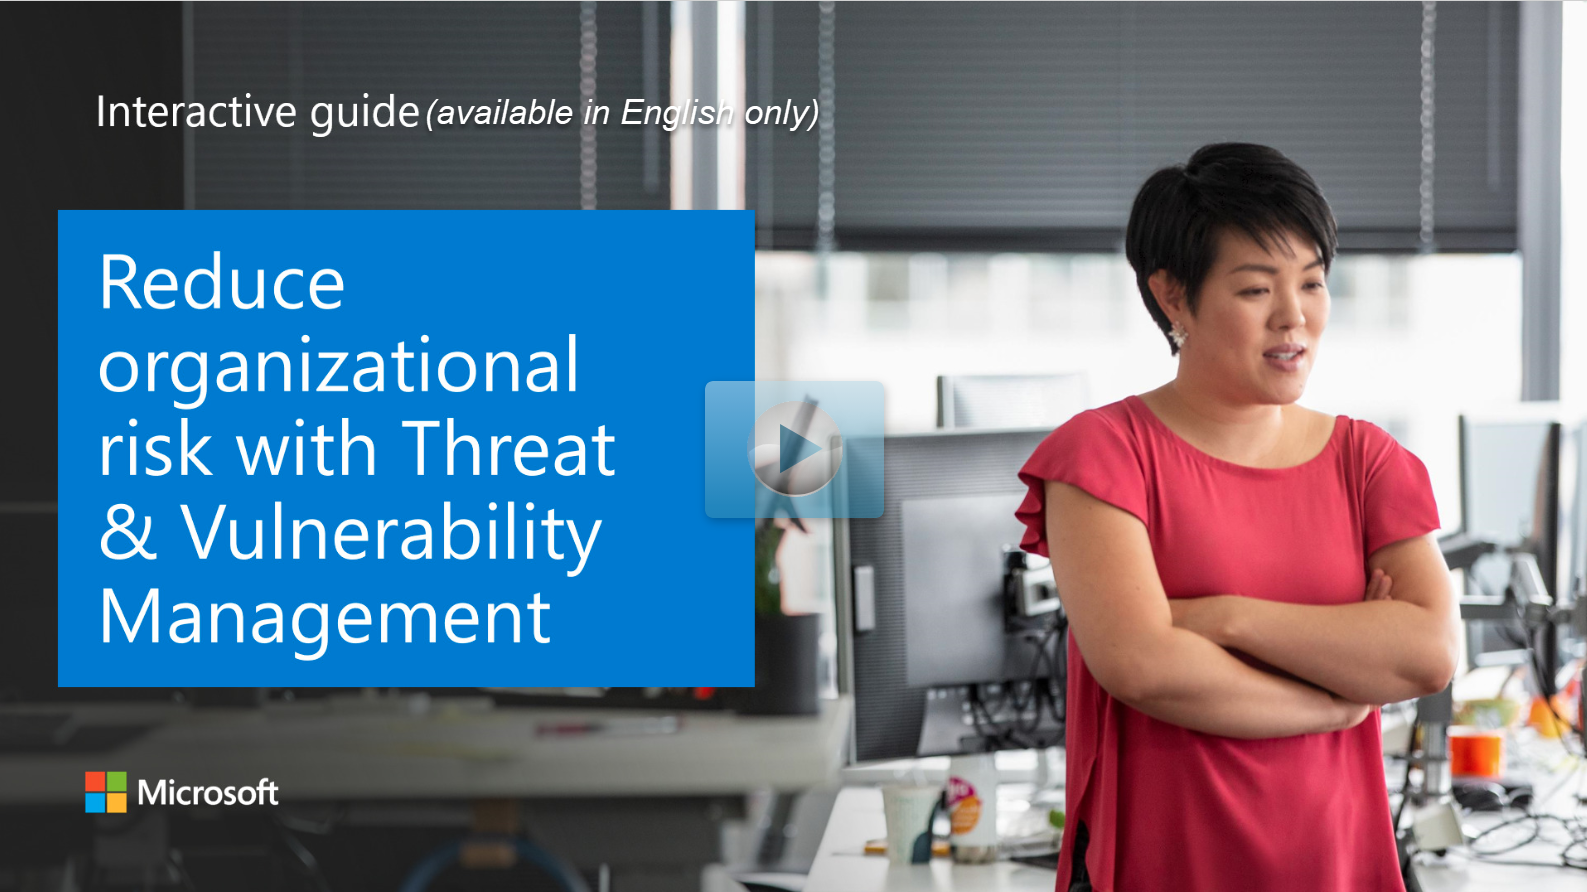 Reduce organizational risk with Threat and Vulnerability Management.